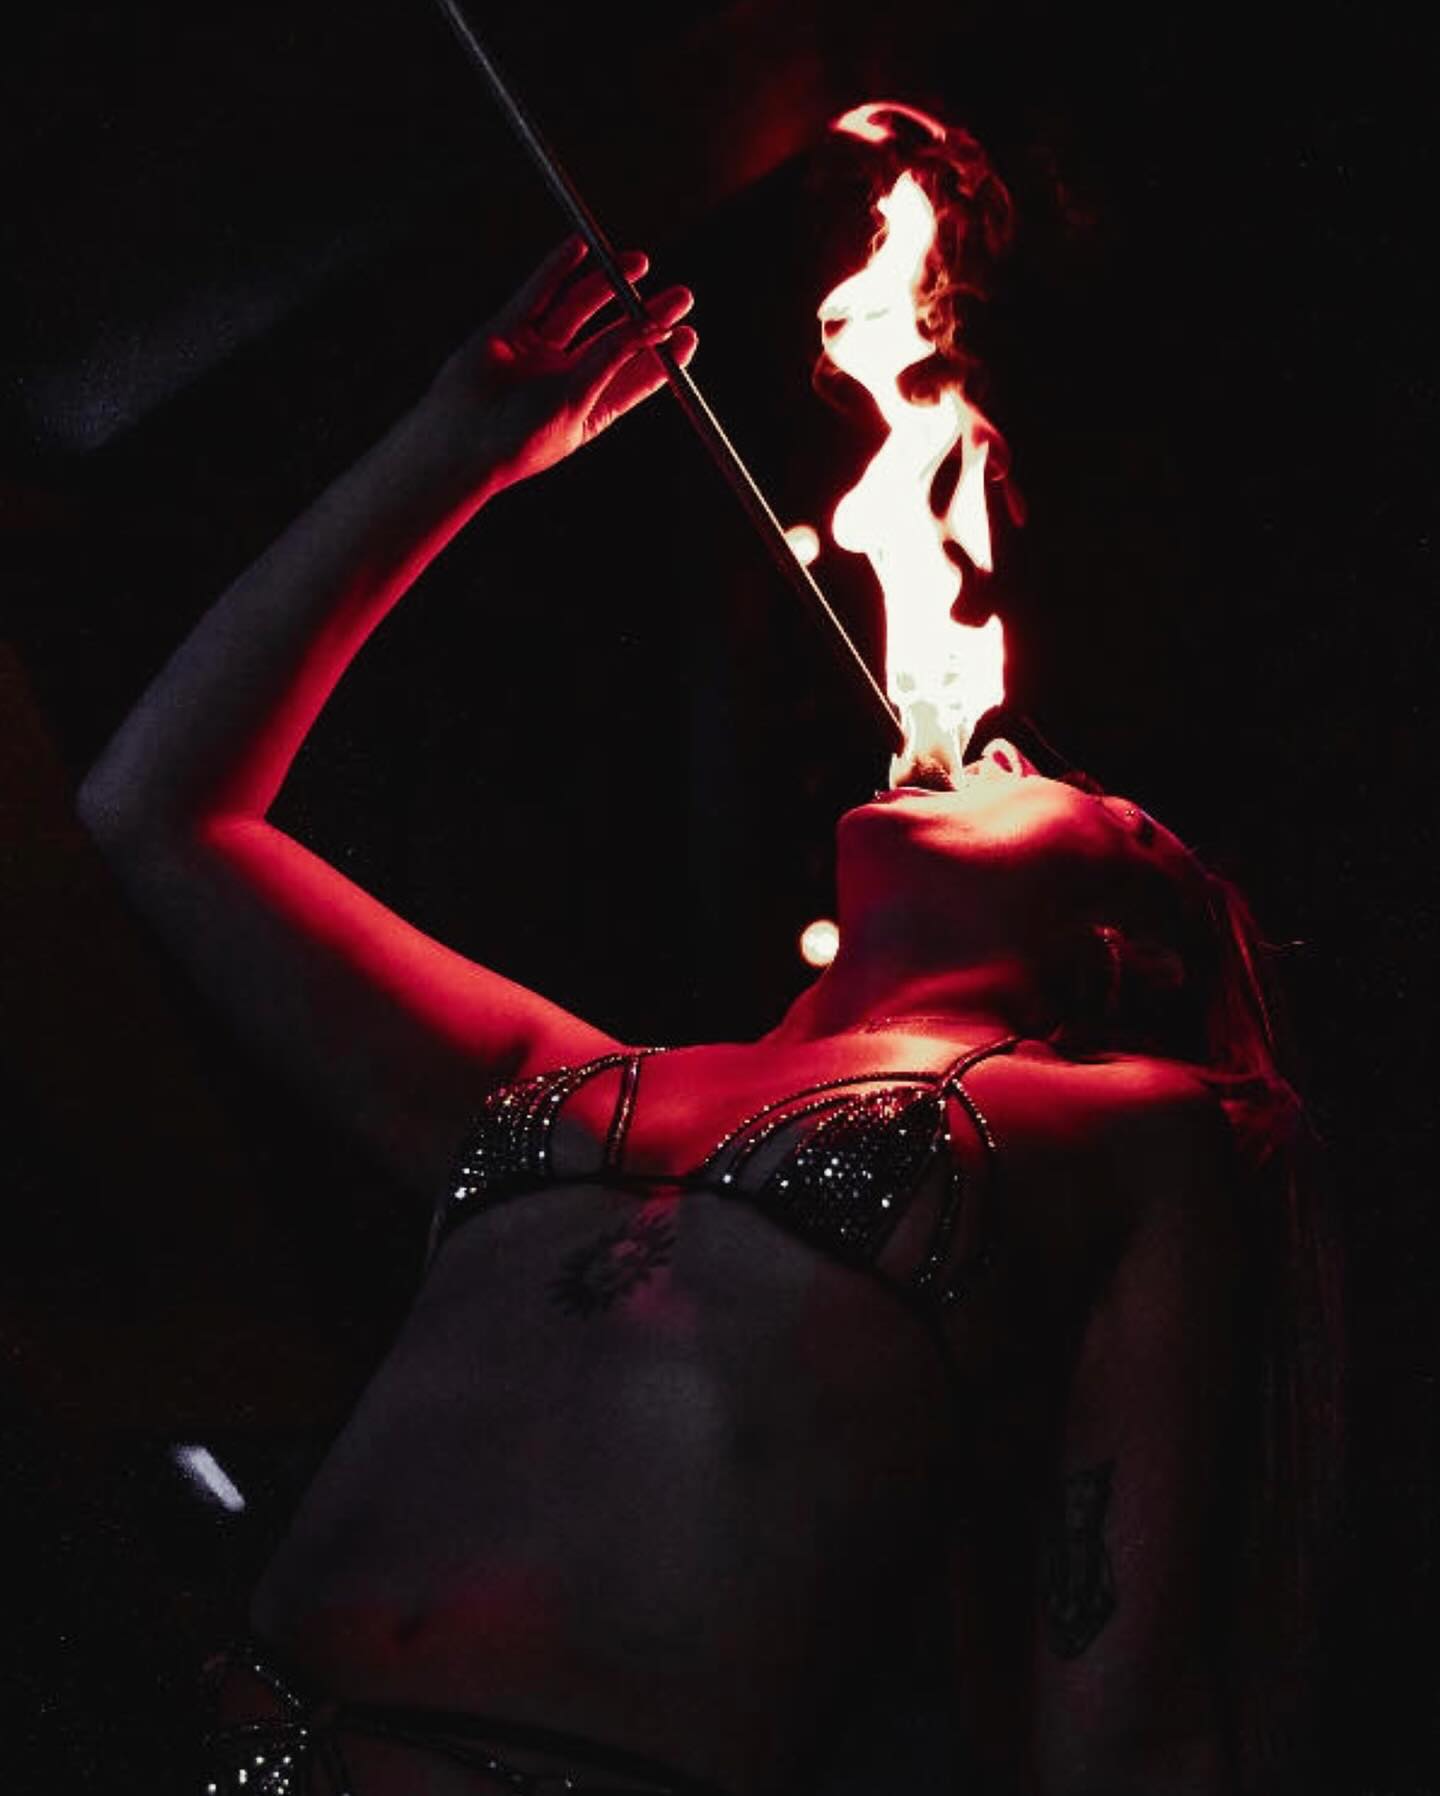 Final round of shows before I go back to my regular programming 🔥✨ 
Come see me eat those tasty flames and turn myself into a human torch ❤️‍🔥

📸 @blondie_pix 
#showgirl #burlesque #fireeating #dubstep #fireperformer